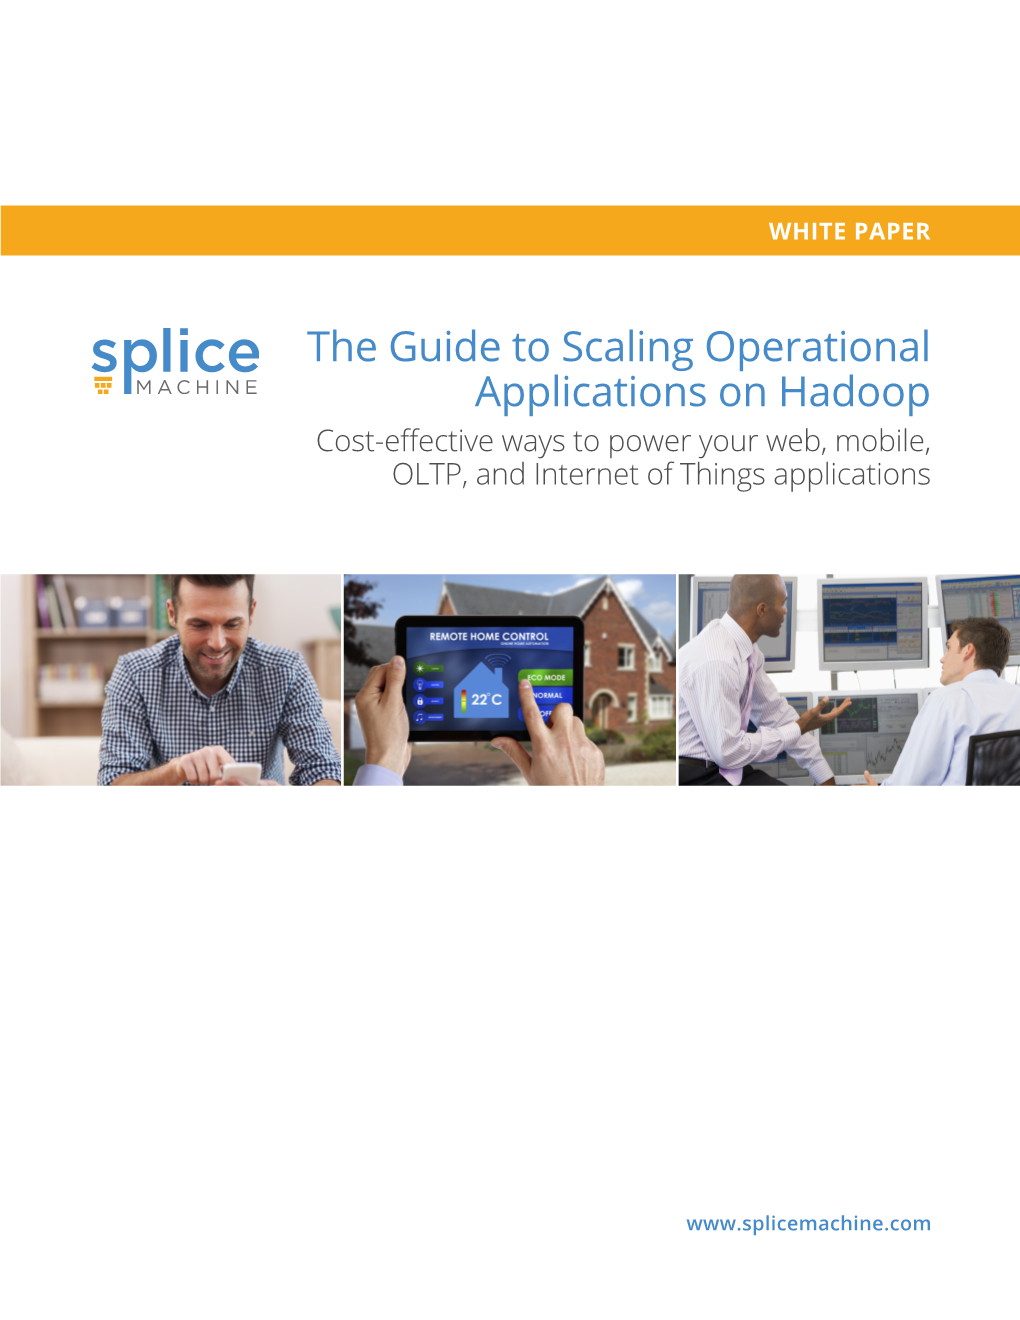 The Guide to Scaling Operational Applications on Hadoop Cost-Effective Ways to Power Your Web, Mobile, OLTP, and Internet of Things Applications